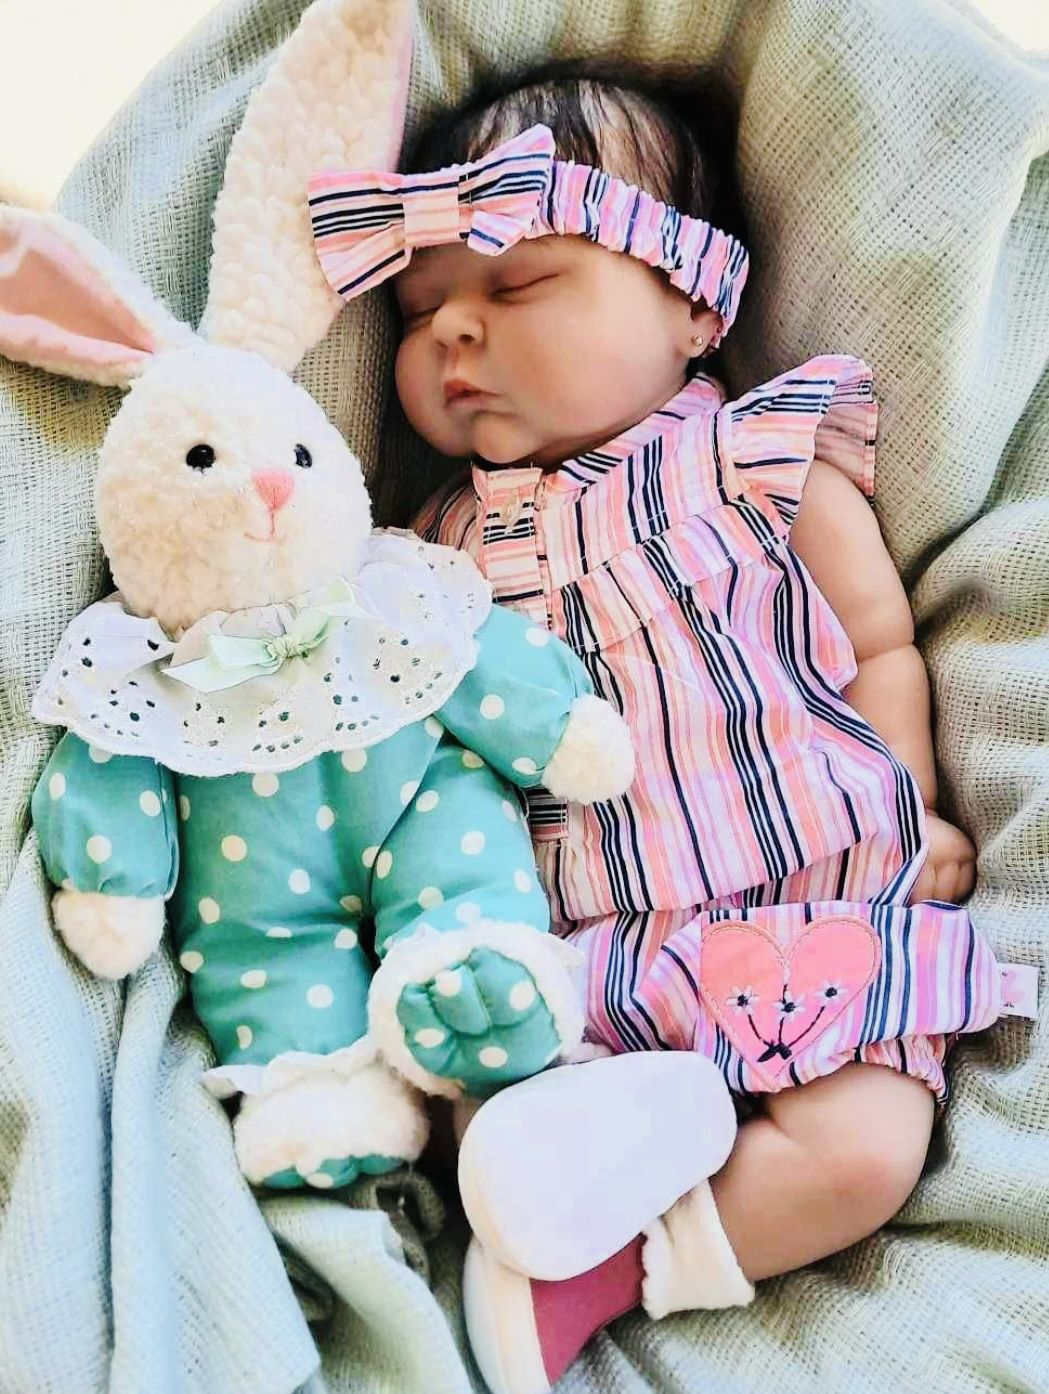 Reborn Baby Peaches With Clothes 